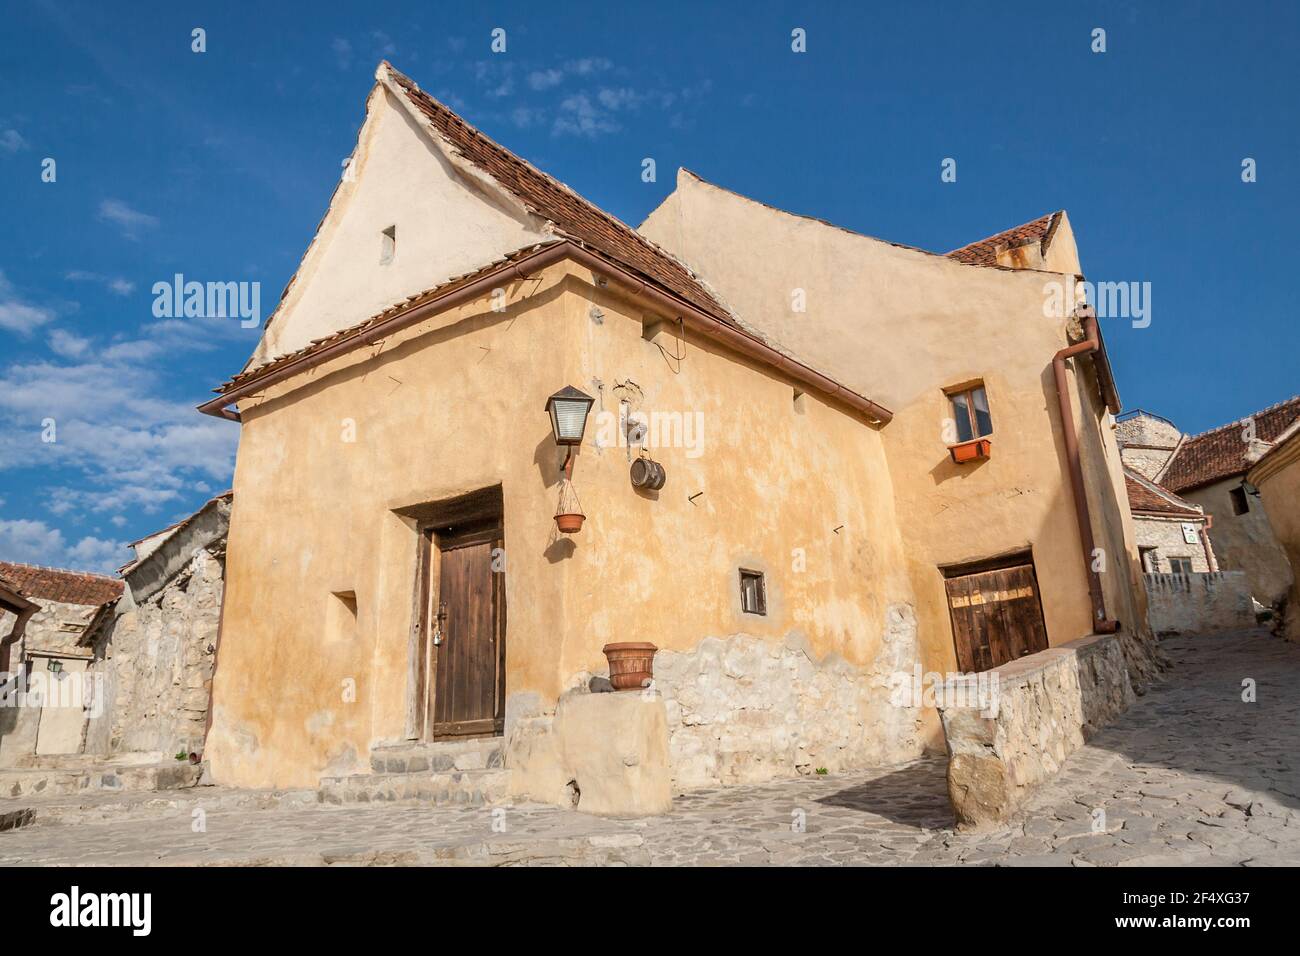 Inside courtyard and old houses of The Rasnov Citadel, little medieval fortress in traditional romanian style near Brasov city. Traditional medieval house in Transylvania region of Romania. Stock Photo